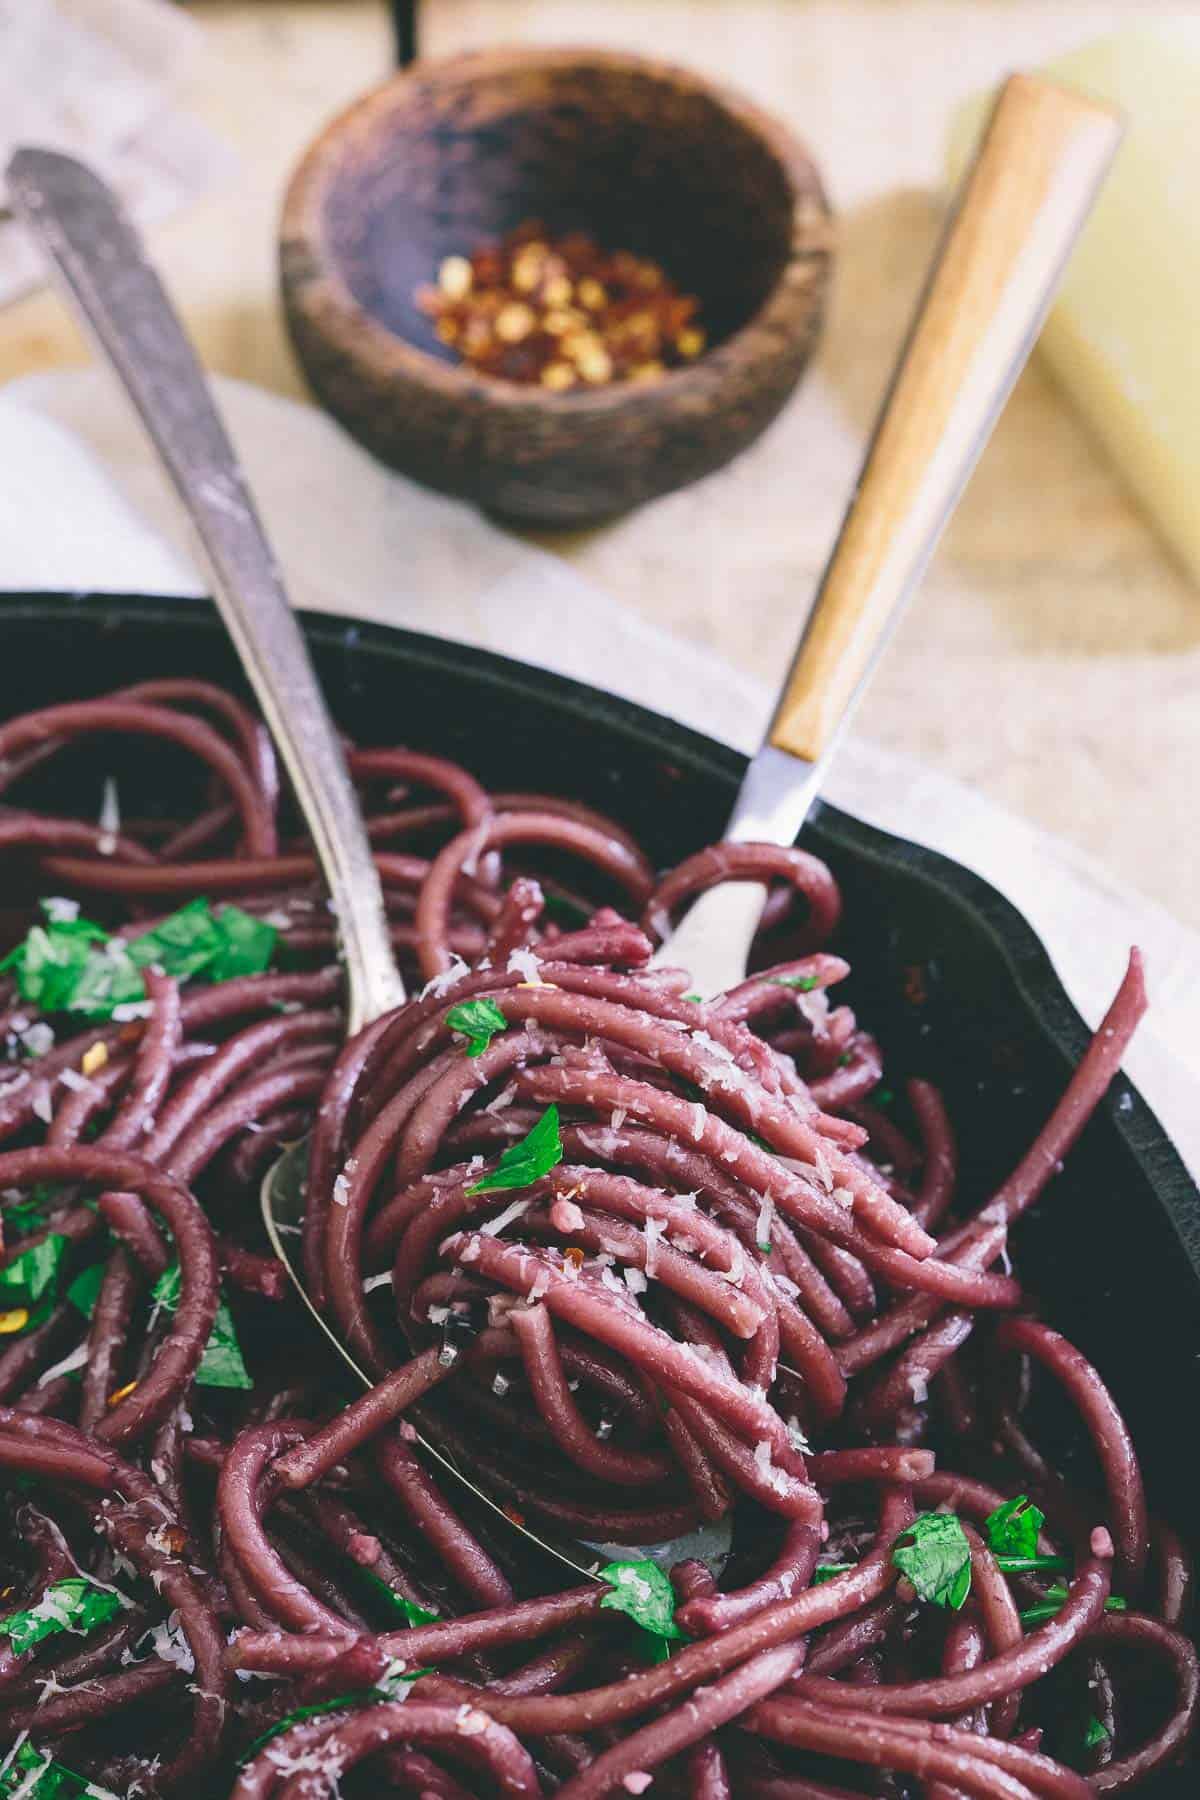 Red Wine Garlic Bucatini makes for a jaw dropping color and elegant meal that couldn't be easier.